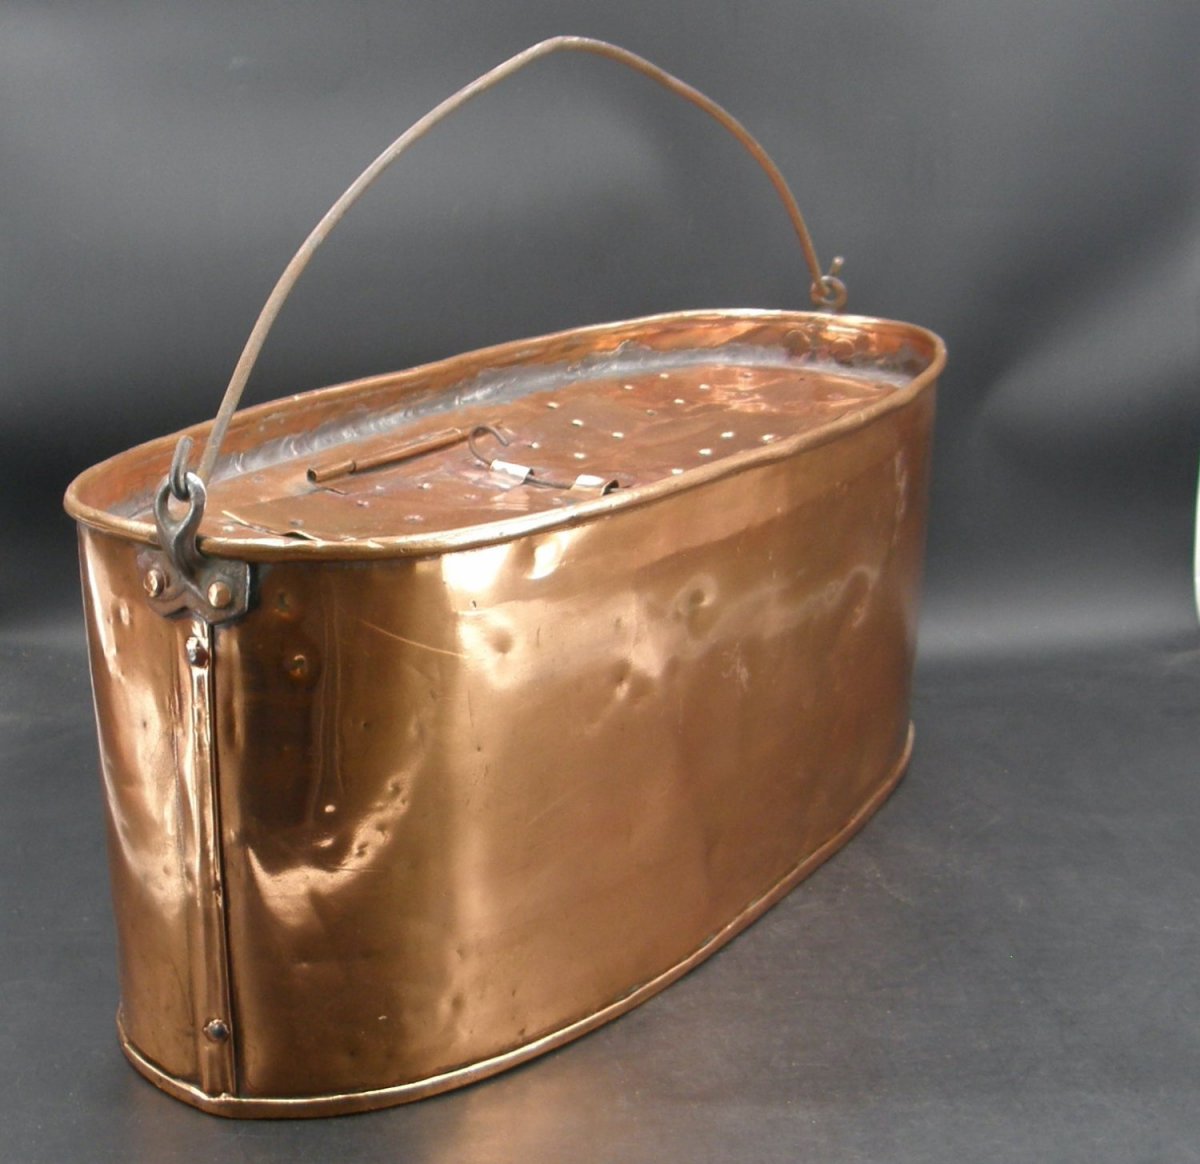 0172:: 1900 Fishing, Bait, Minnow Bucket, signed F.H. Poschinger Lou. KY,  large 18L with an aerator - Mark C. Grove